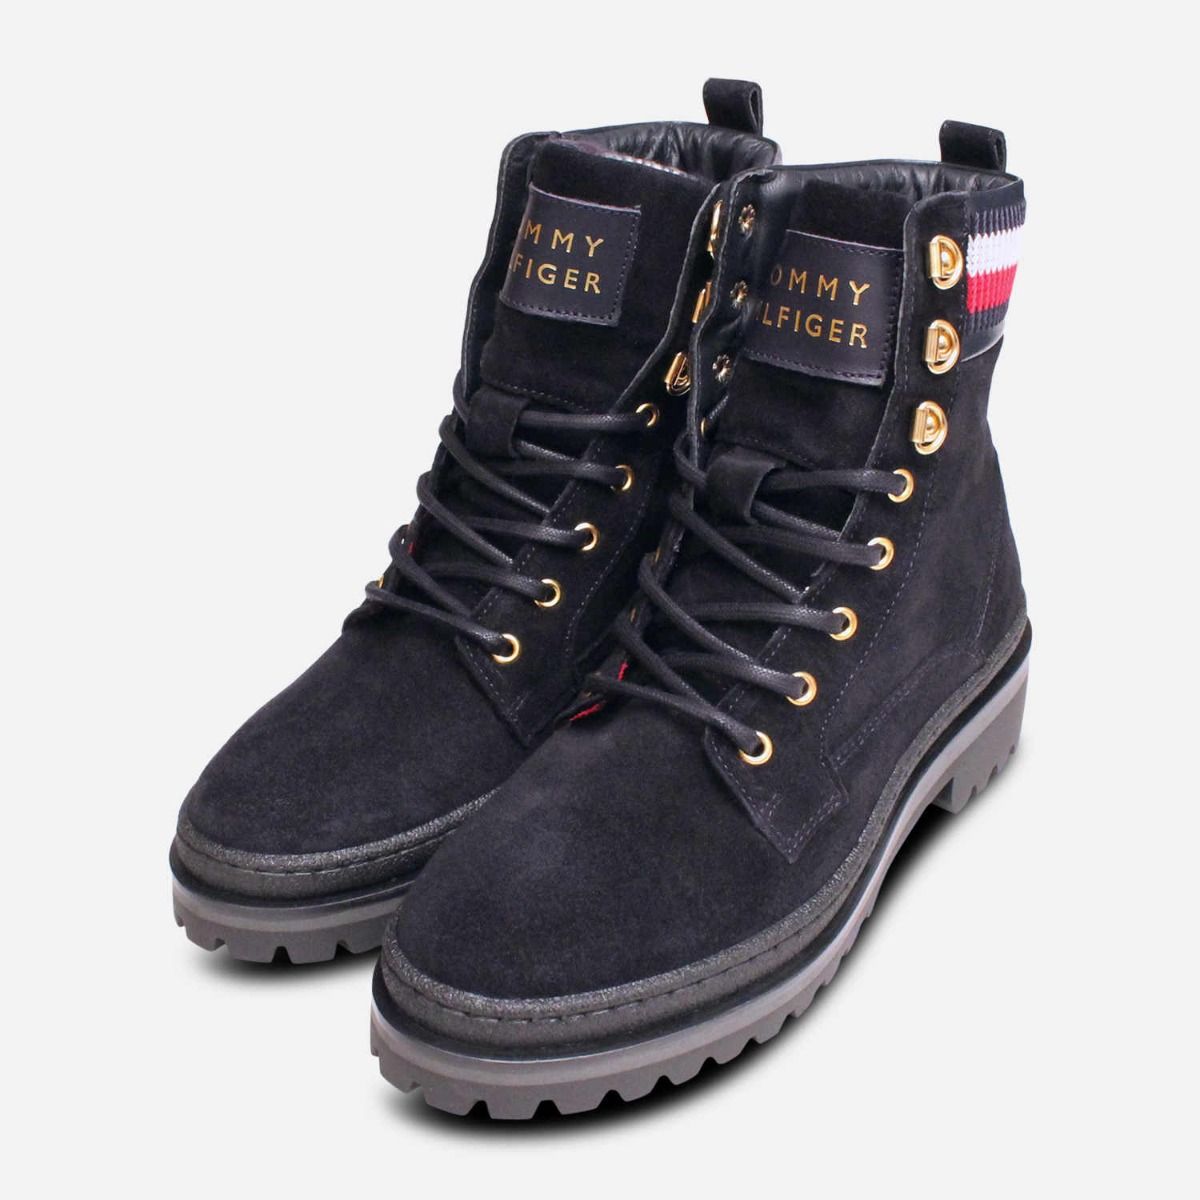 tommy hilfiger navy boots